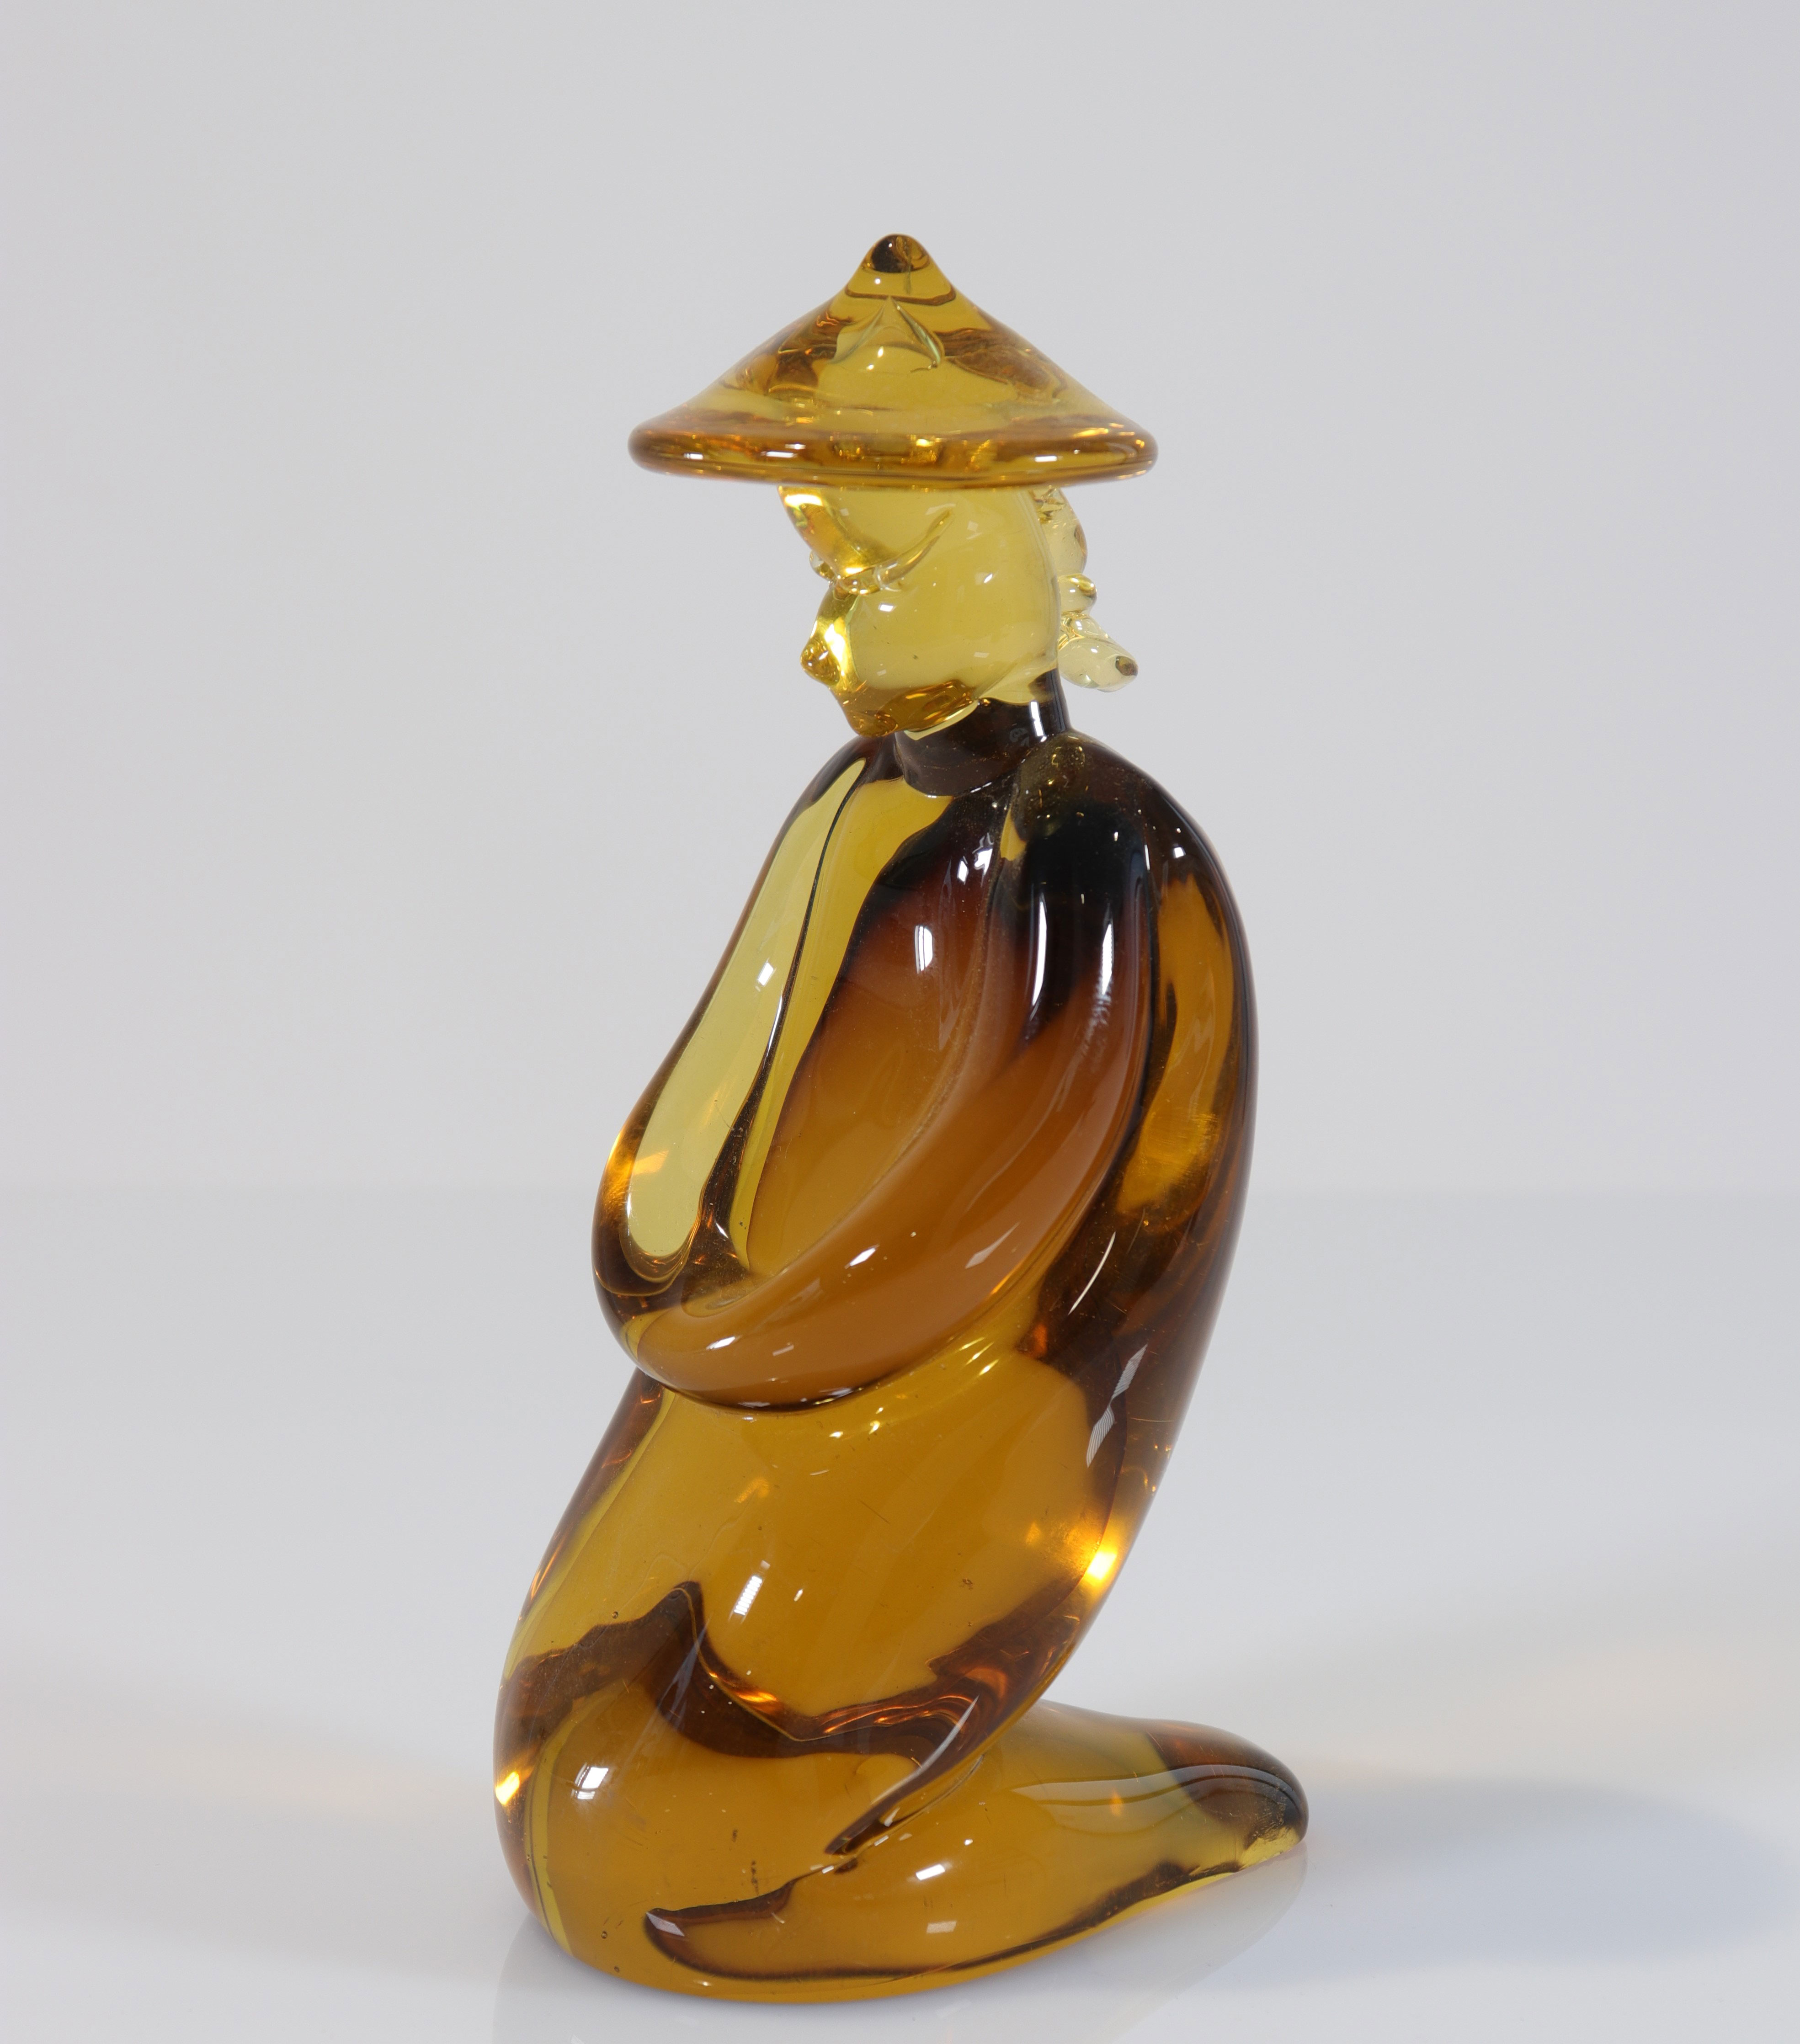 Italy - Merano, yellow glass sculpture, depicting a Chinese - 1960